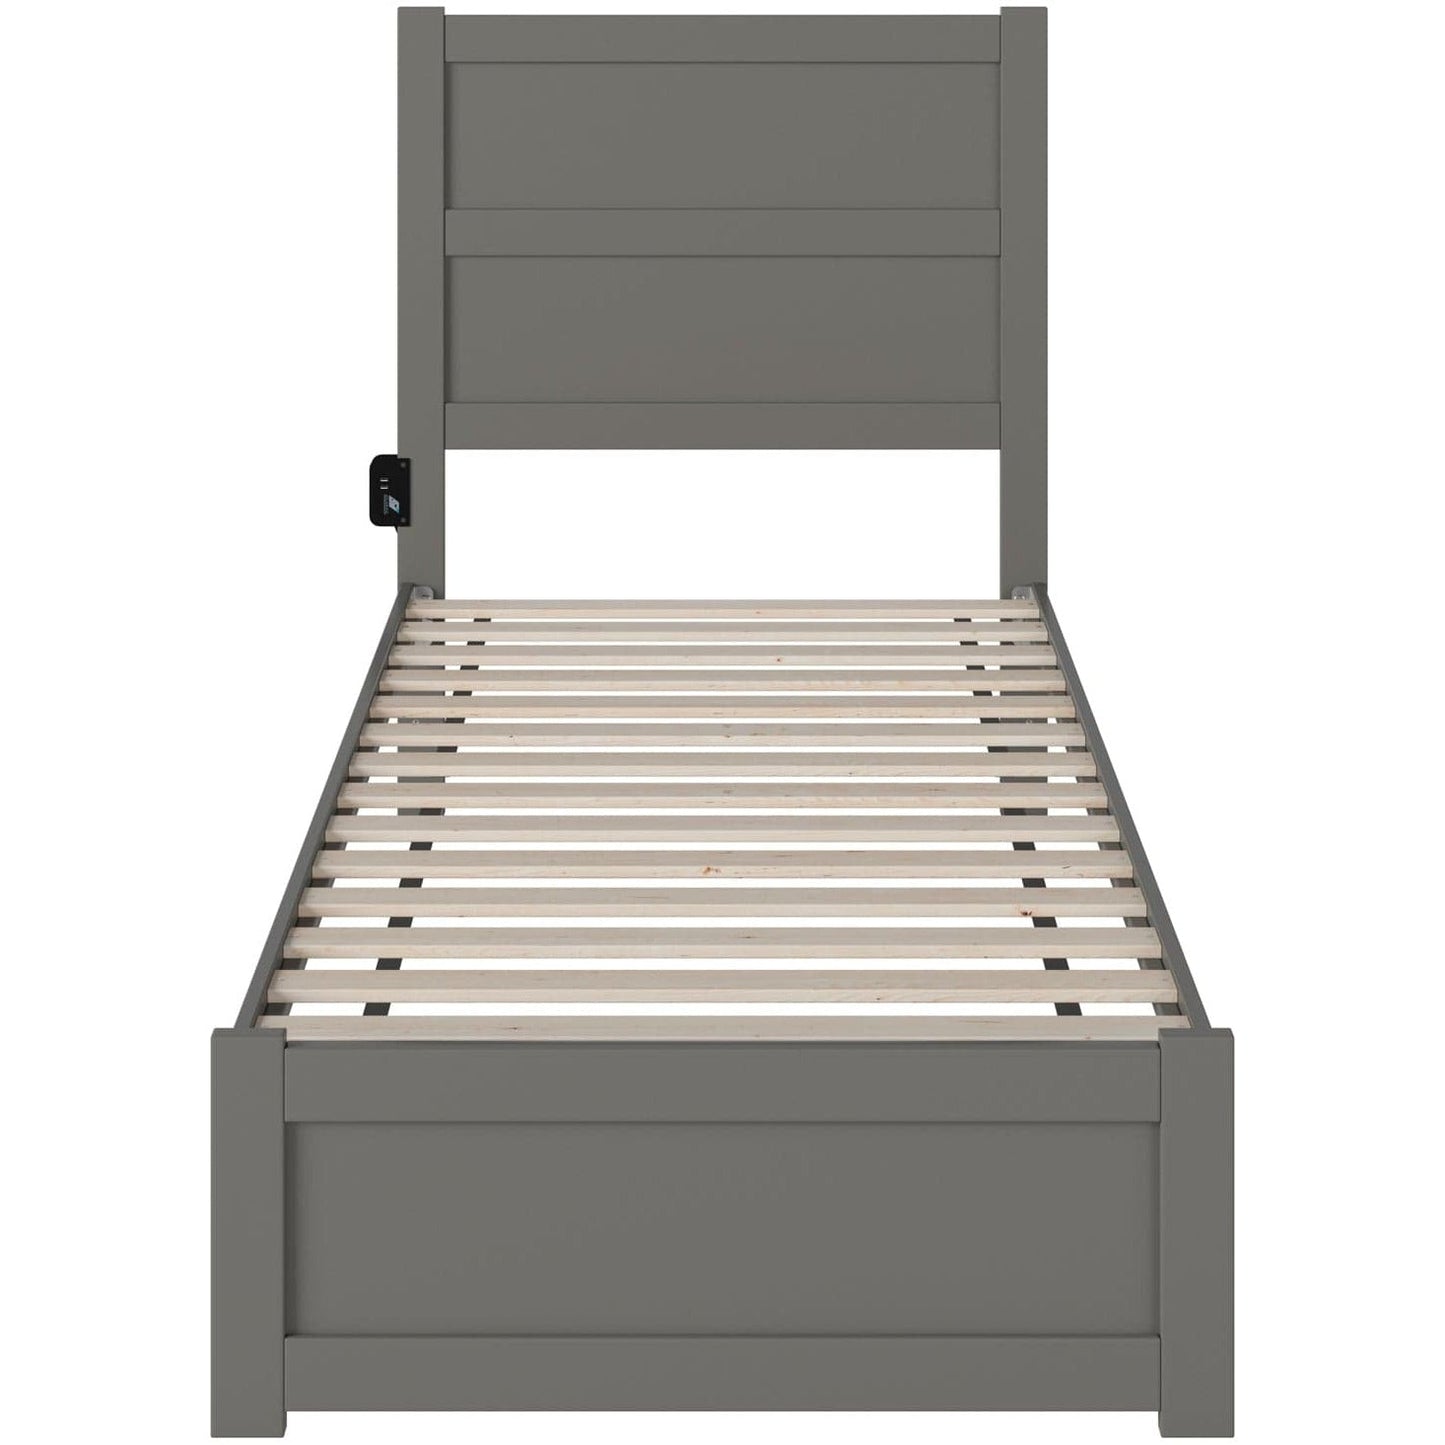 AFI Furnishings NoHo Twin Extra Long Bed with Footboard in Grey AG9160019